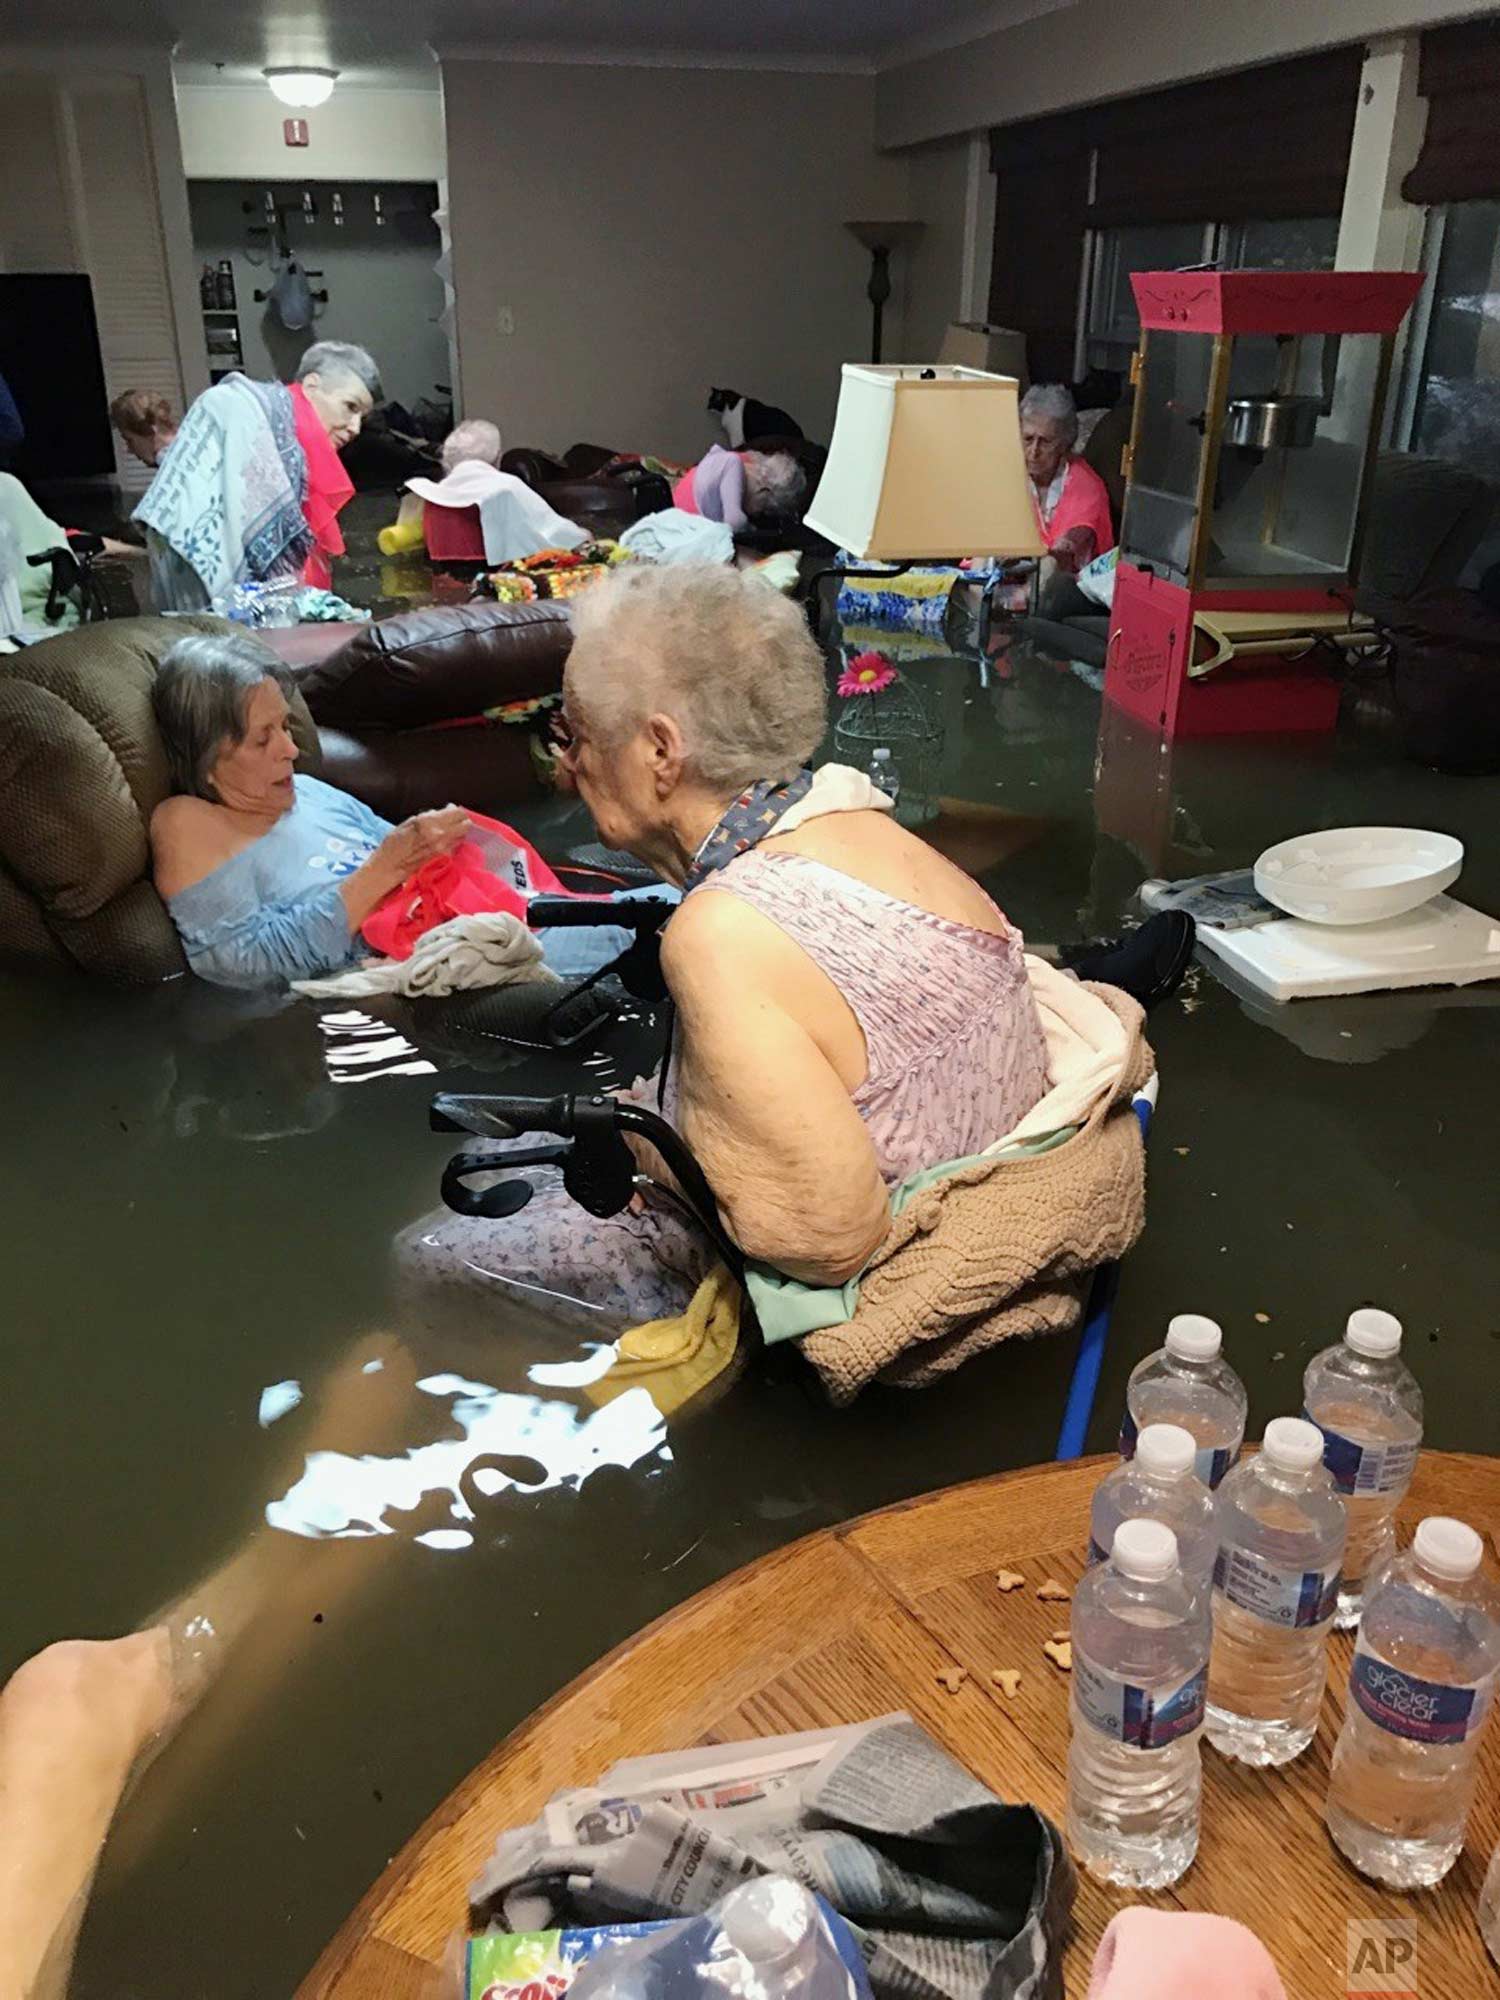  In this photo provided by Trudy Lampson, residents of the La Vita Bella nursing home in Dickinson, Texas, sit in waist-deep flood waters caused by Hurricane Harvey on Sunday, Aug. 27, 2017. Authorities said all the residents were safely evacuated fr